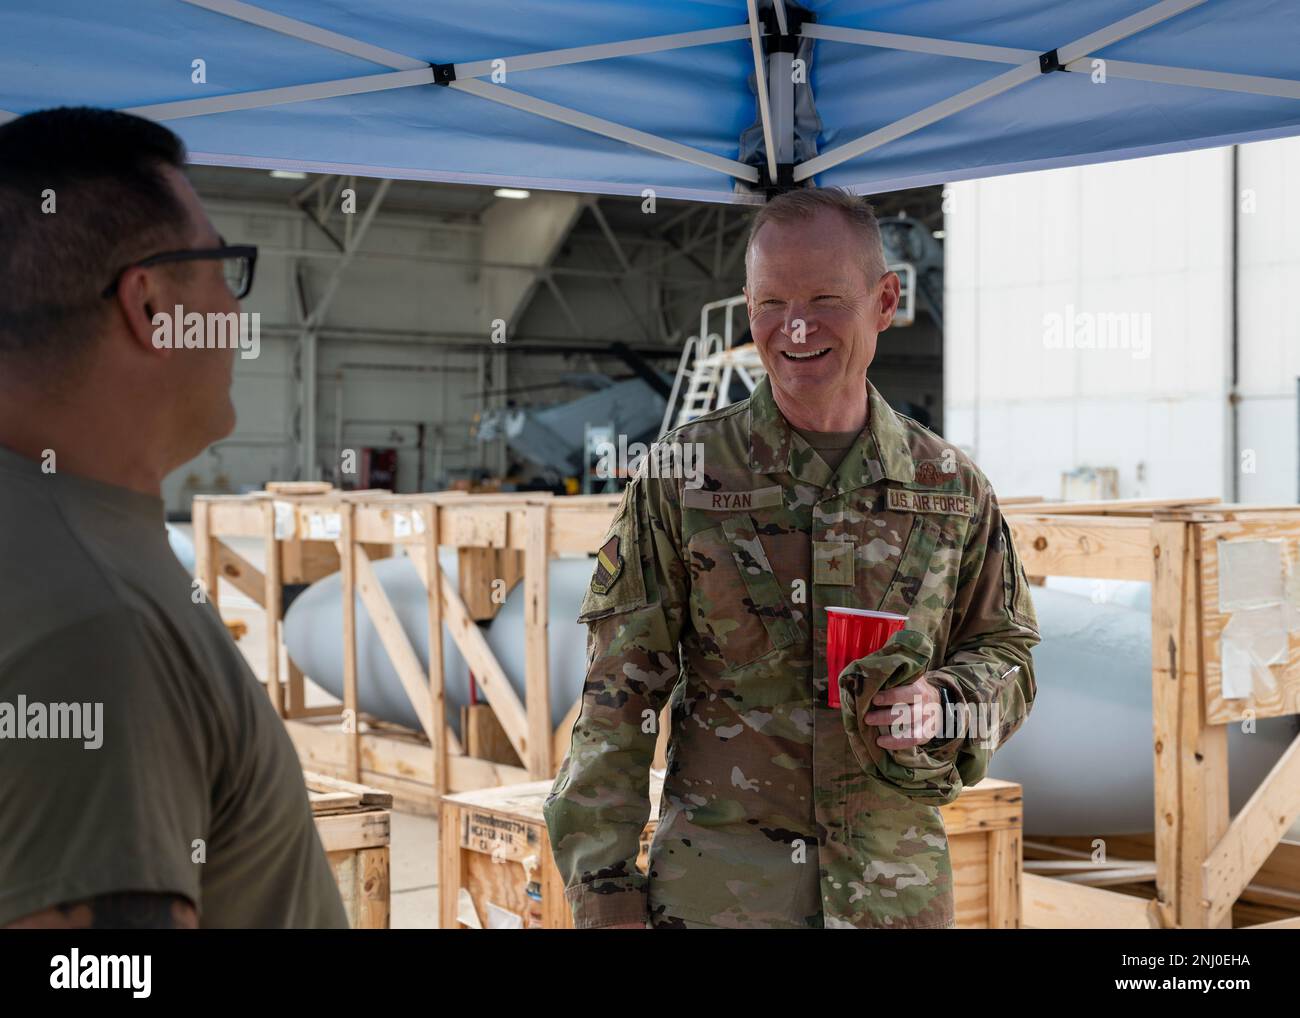 U.S. Air Force Master Sgt.Thomas Skaggs, ammunition technician, 140th Wing, Colorado Air National Guard, laughs with Brig. Gen. Shawn Ryan, Assistant Adjutant General-Air and Commander, Colorado Air National Guard, Buckley Space Force Base, Colorado at Miramar Marine Corp Air Station, on Aug 4, 2022. The 140th Wing is performing aerial maneuvers and training with the F-18 fighter jets, stationed at Miramar Air Station, to enhance their wartime readiness capabilities utilizing the latest combat scenarios. Stock Photo